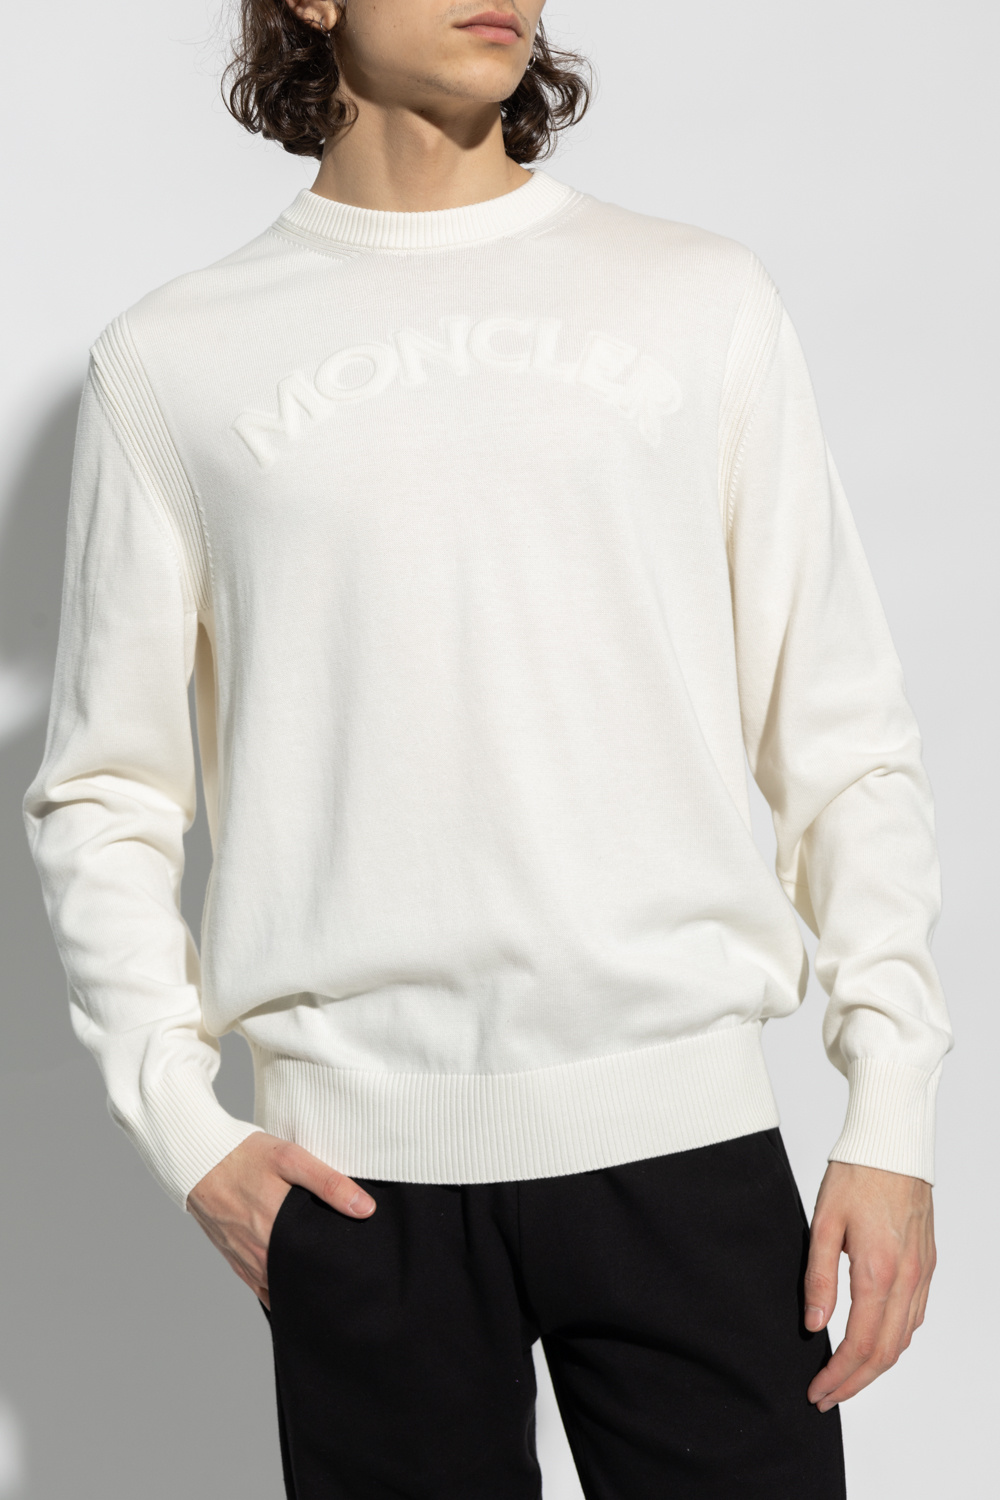 Moncler sweater zip-up with logo